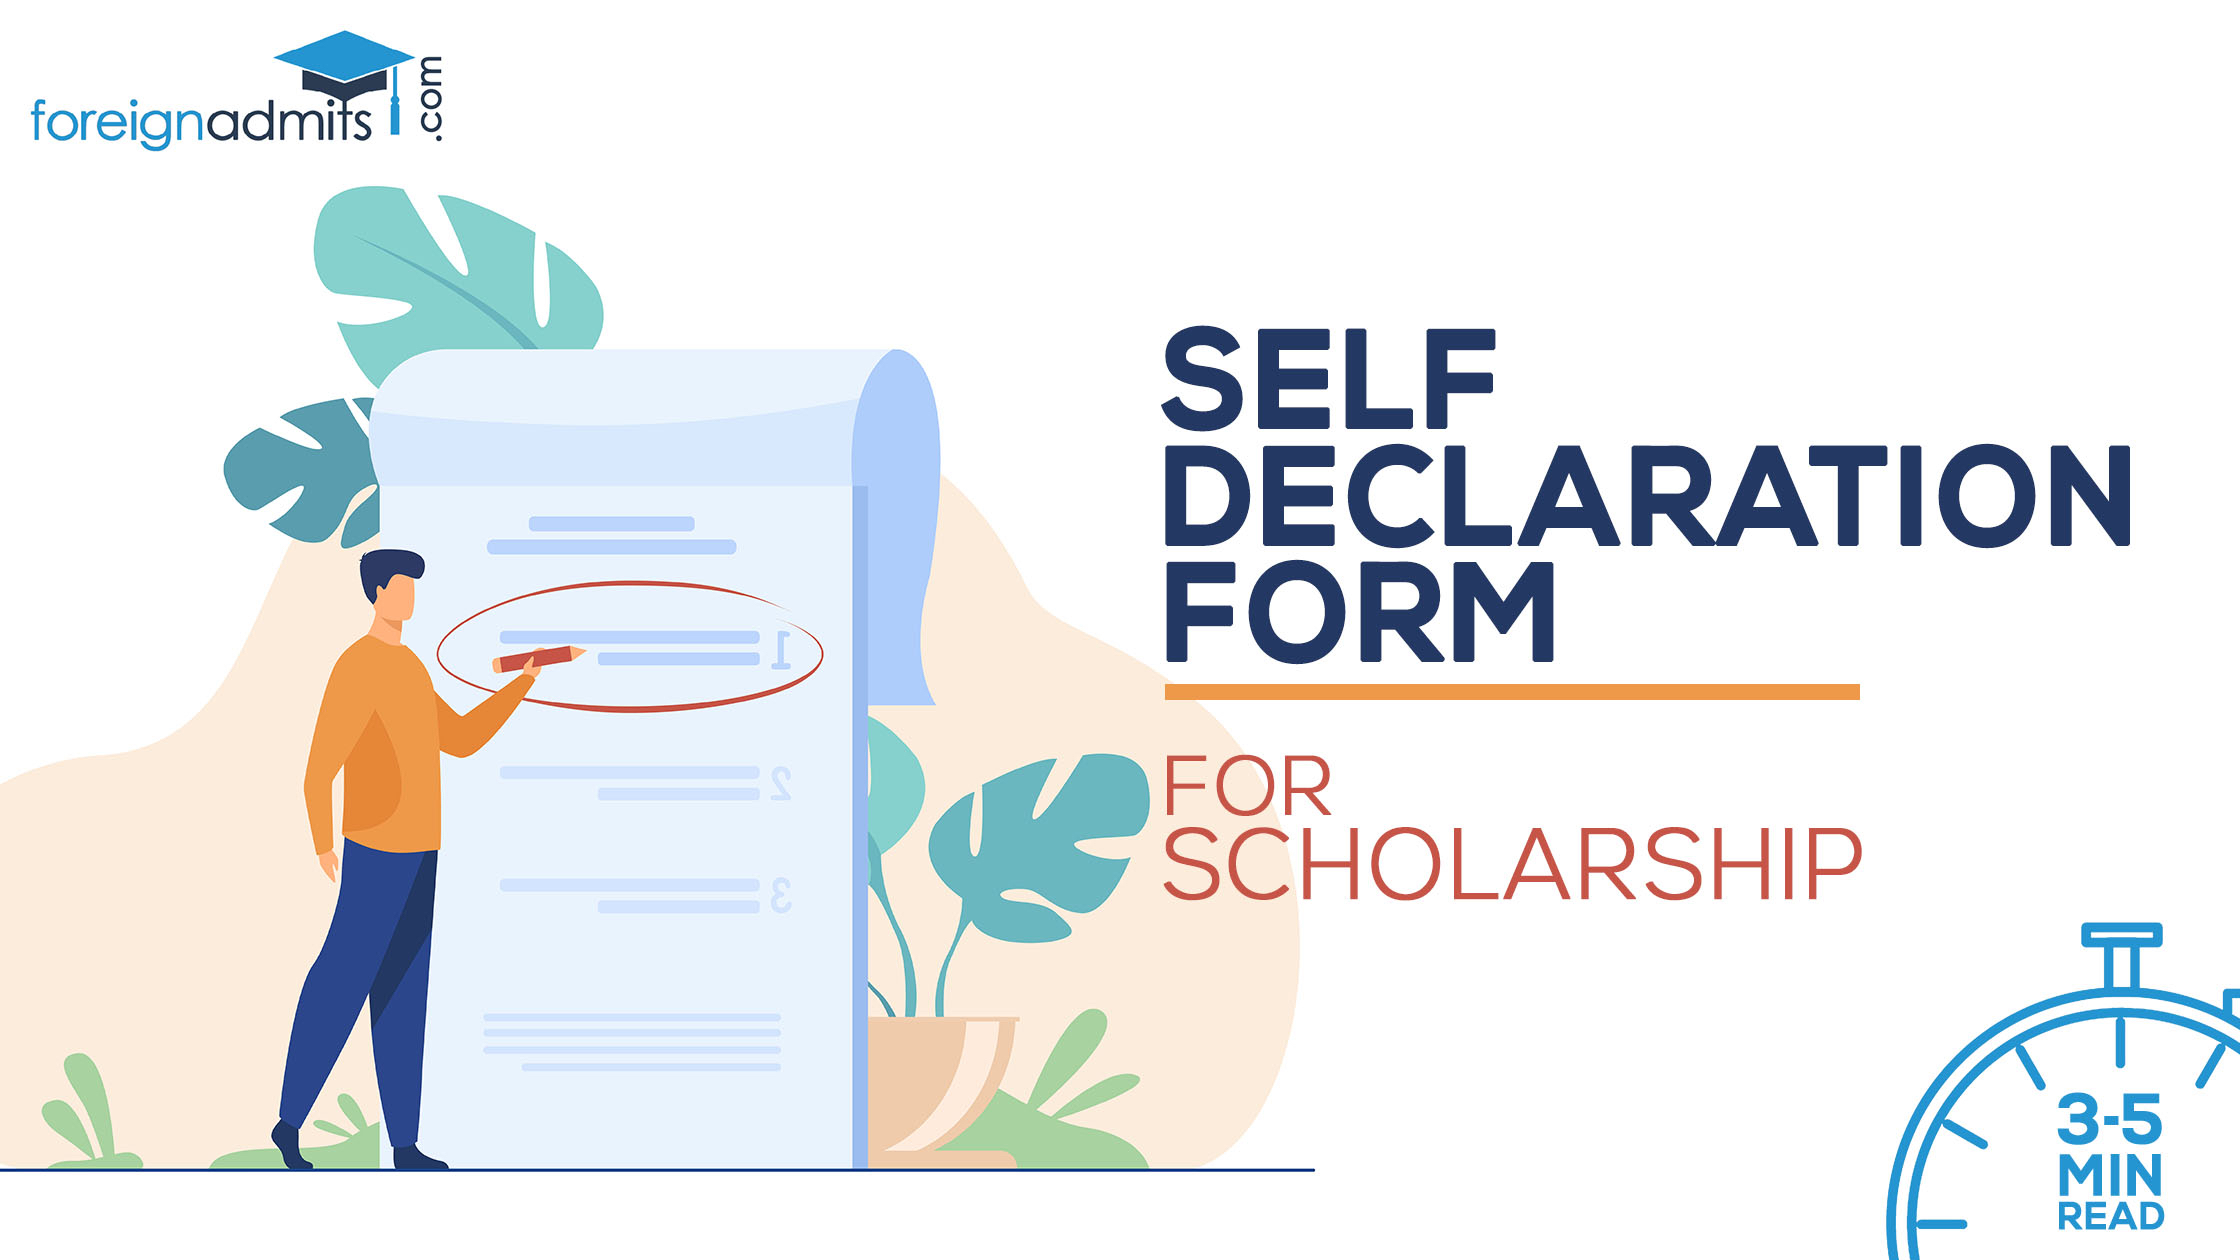 Self Declaration Form for Scholarship [Complete Guide]